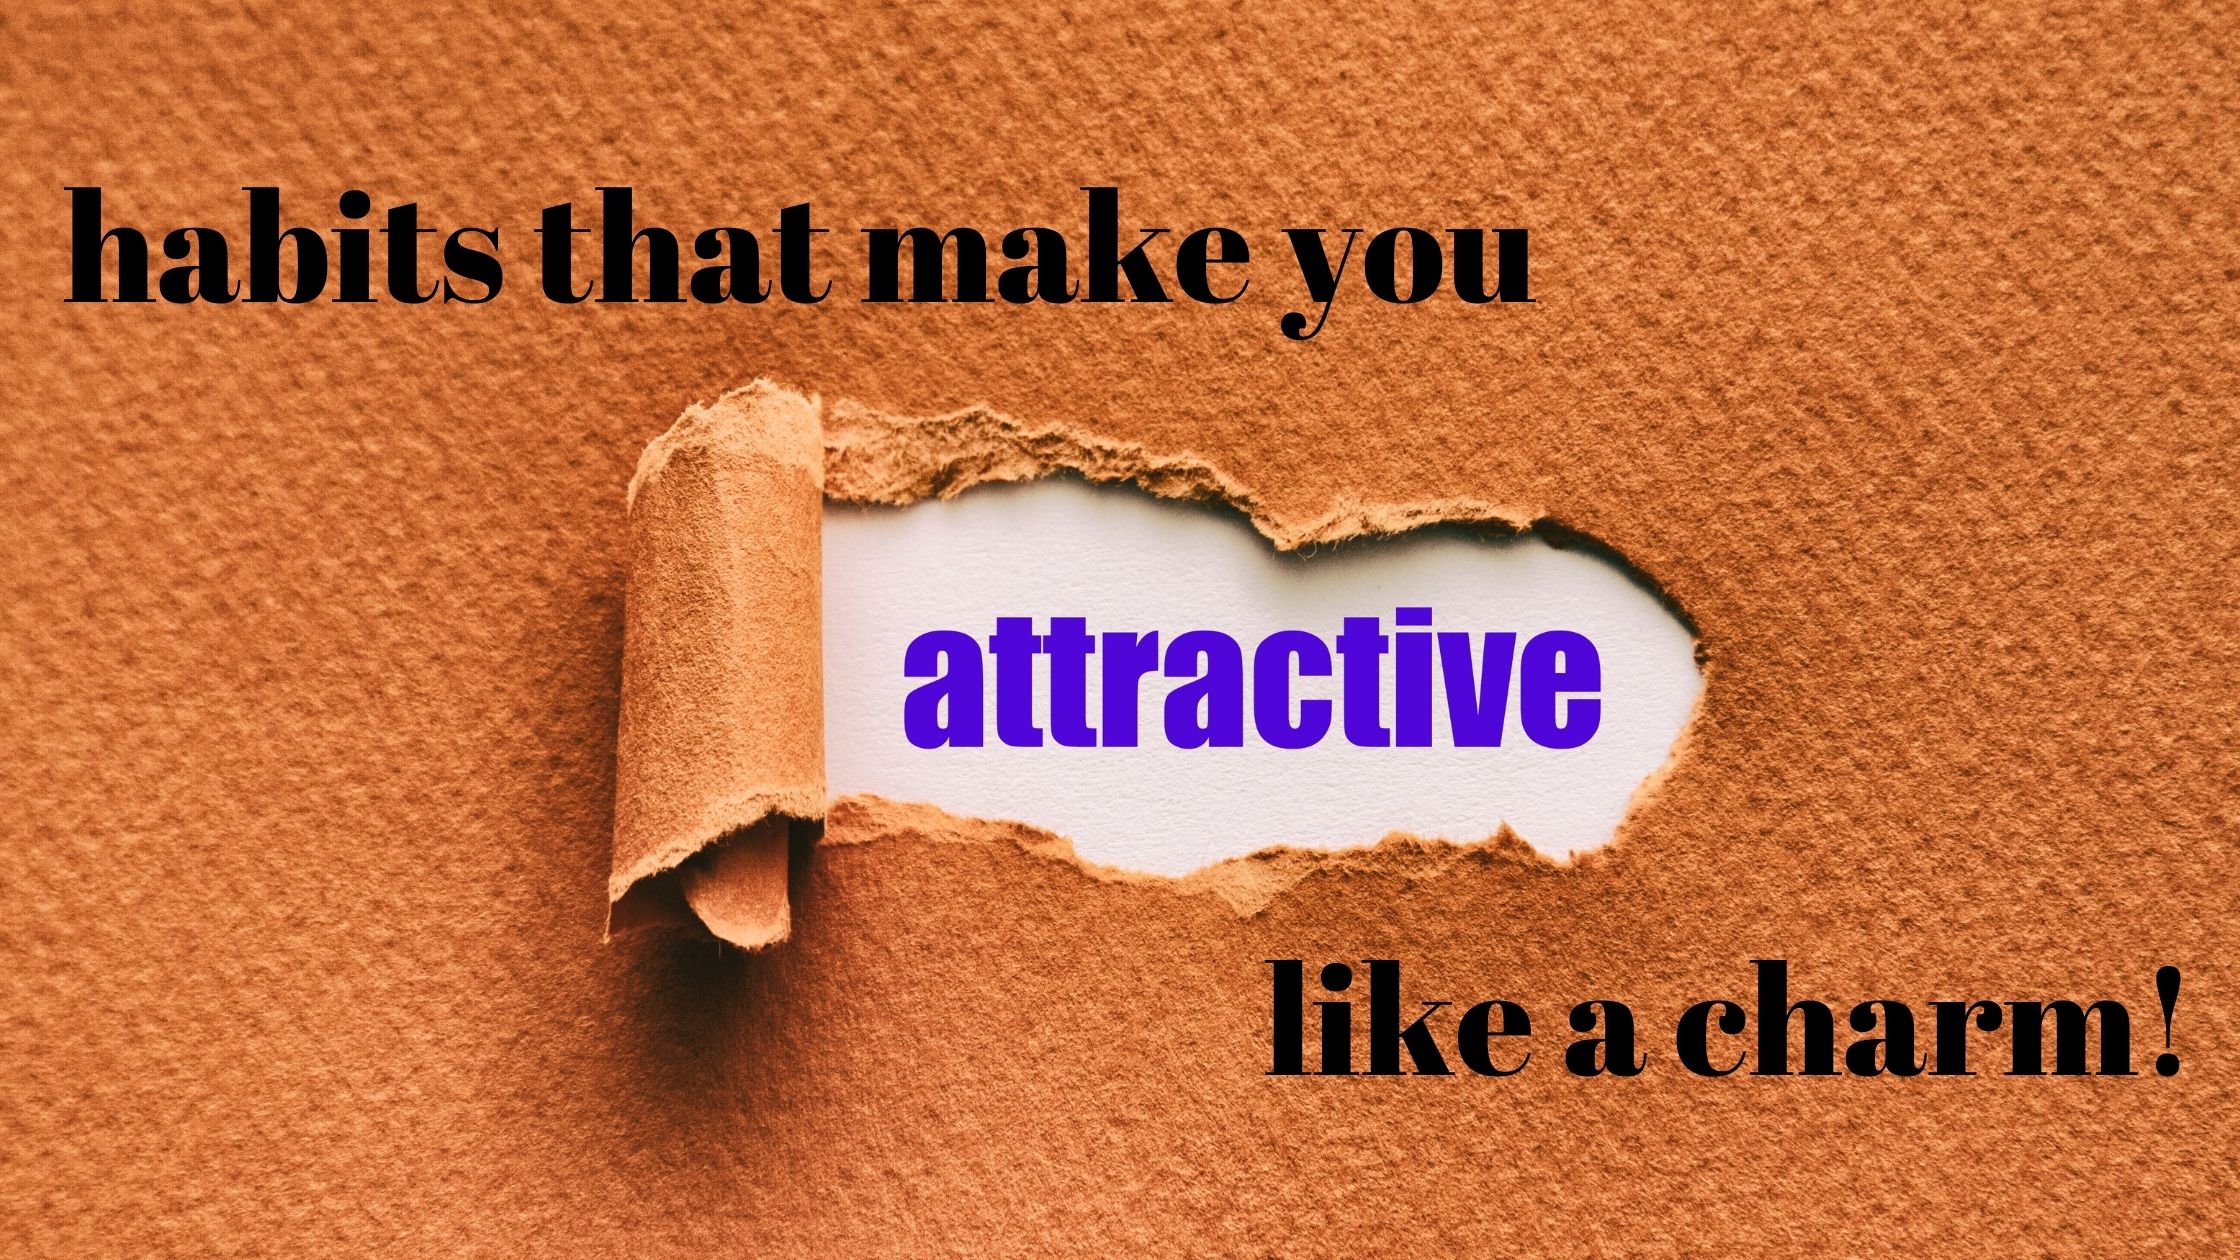 Habits that make you attractive like a charm!